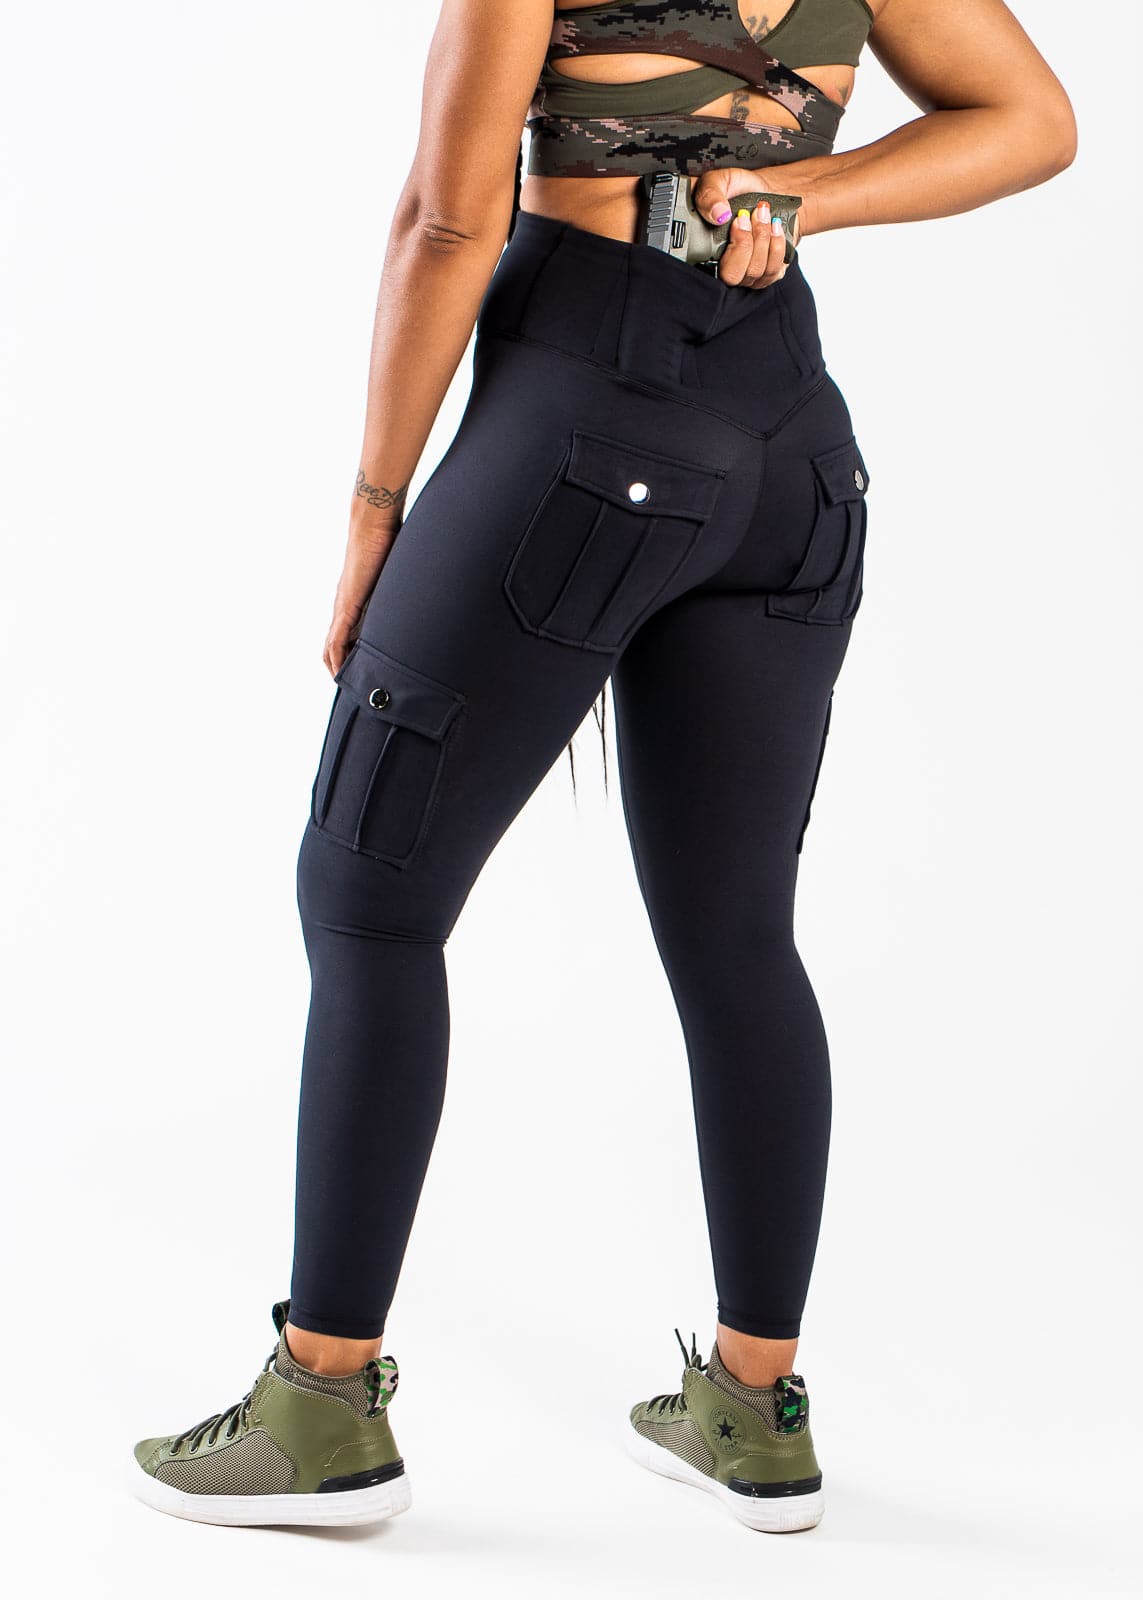 Concealed Carry Leggings With Tactical Pockets Shoulders Down 3/4 Back View Reaching for Concealed Carry | Black